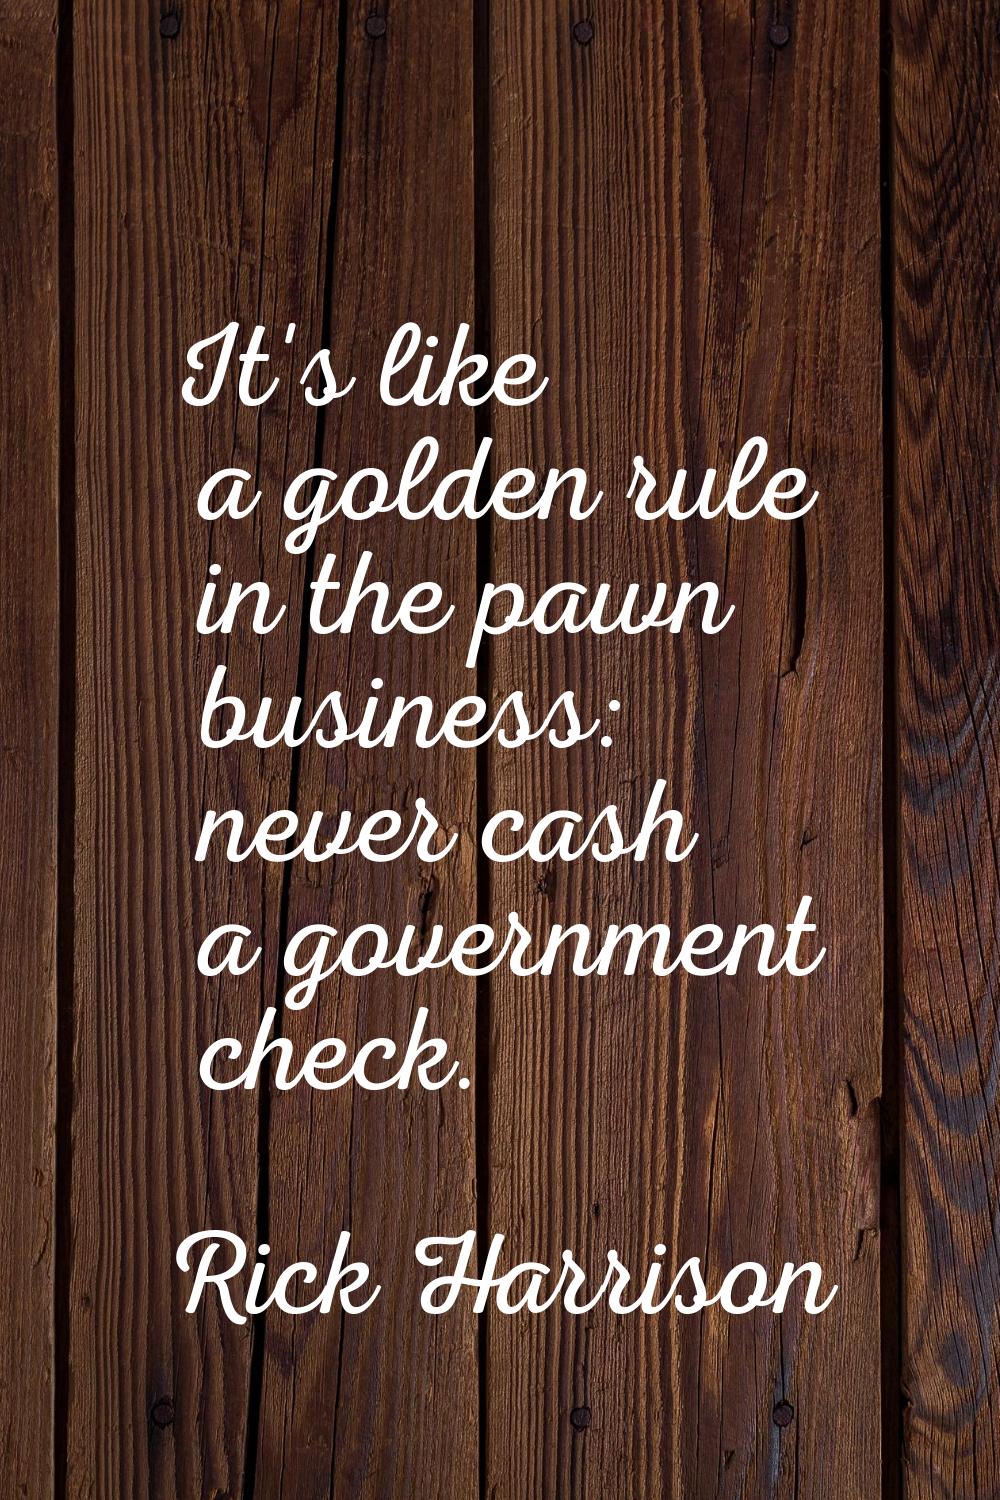 It's like a golden rule in the pawn business: never cash a government check.